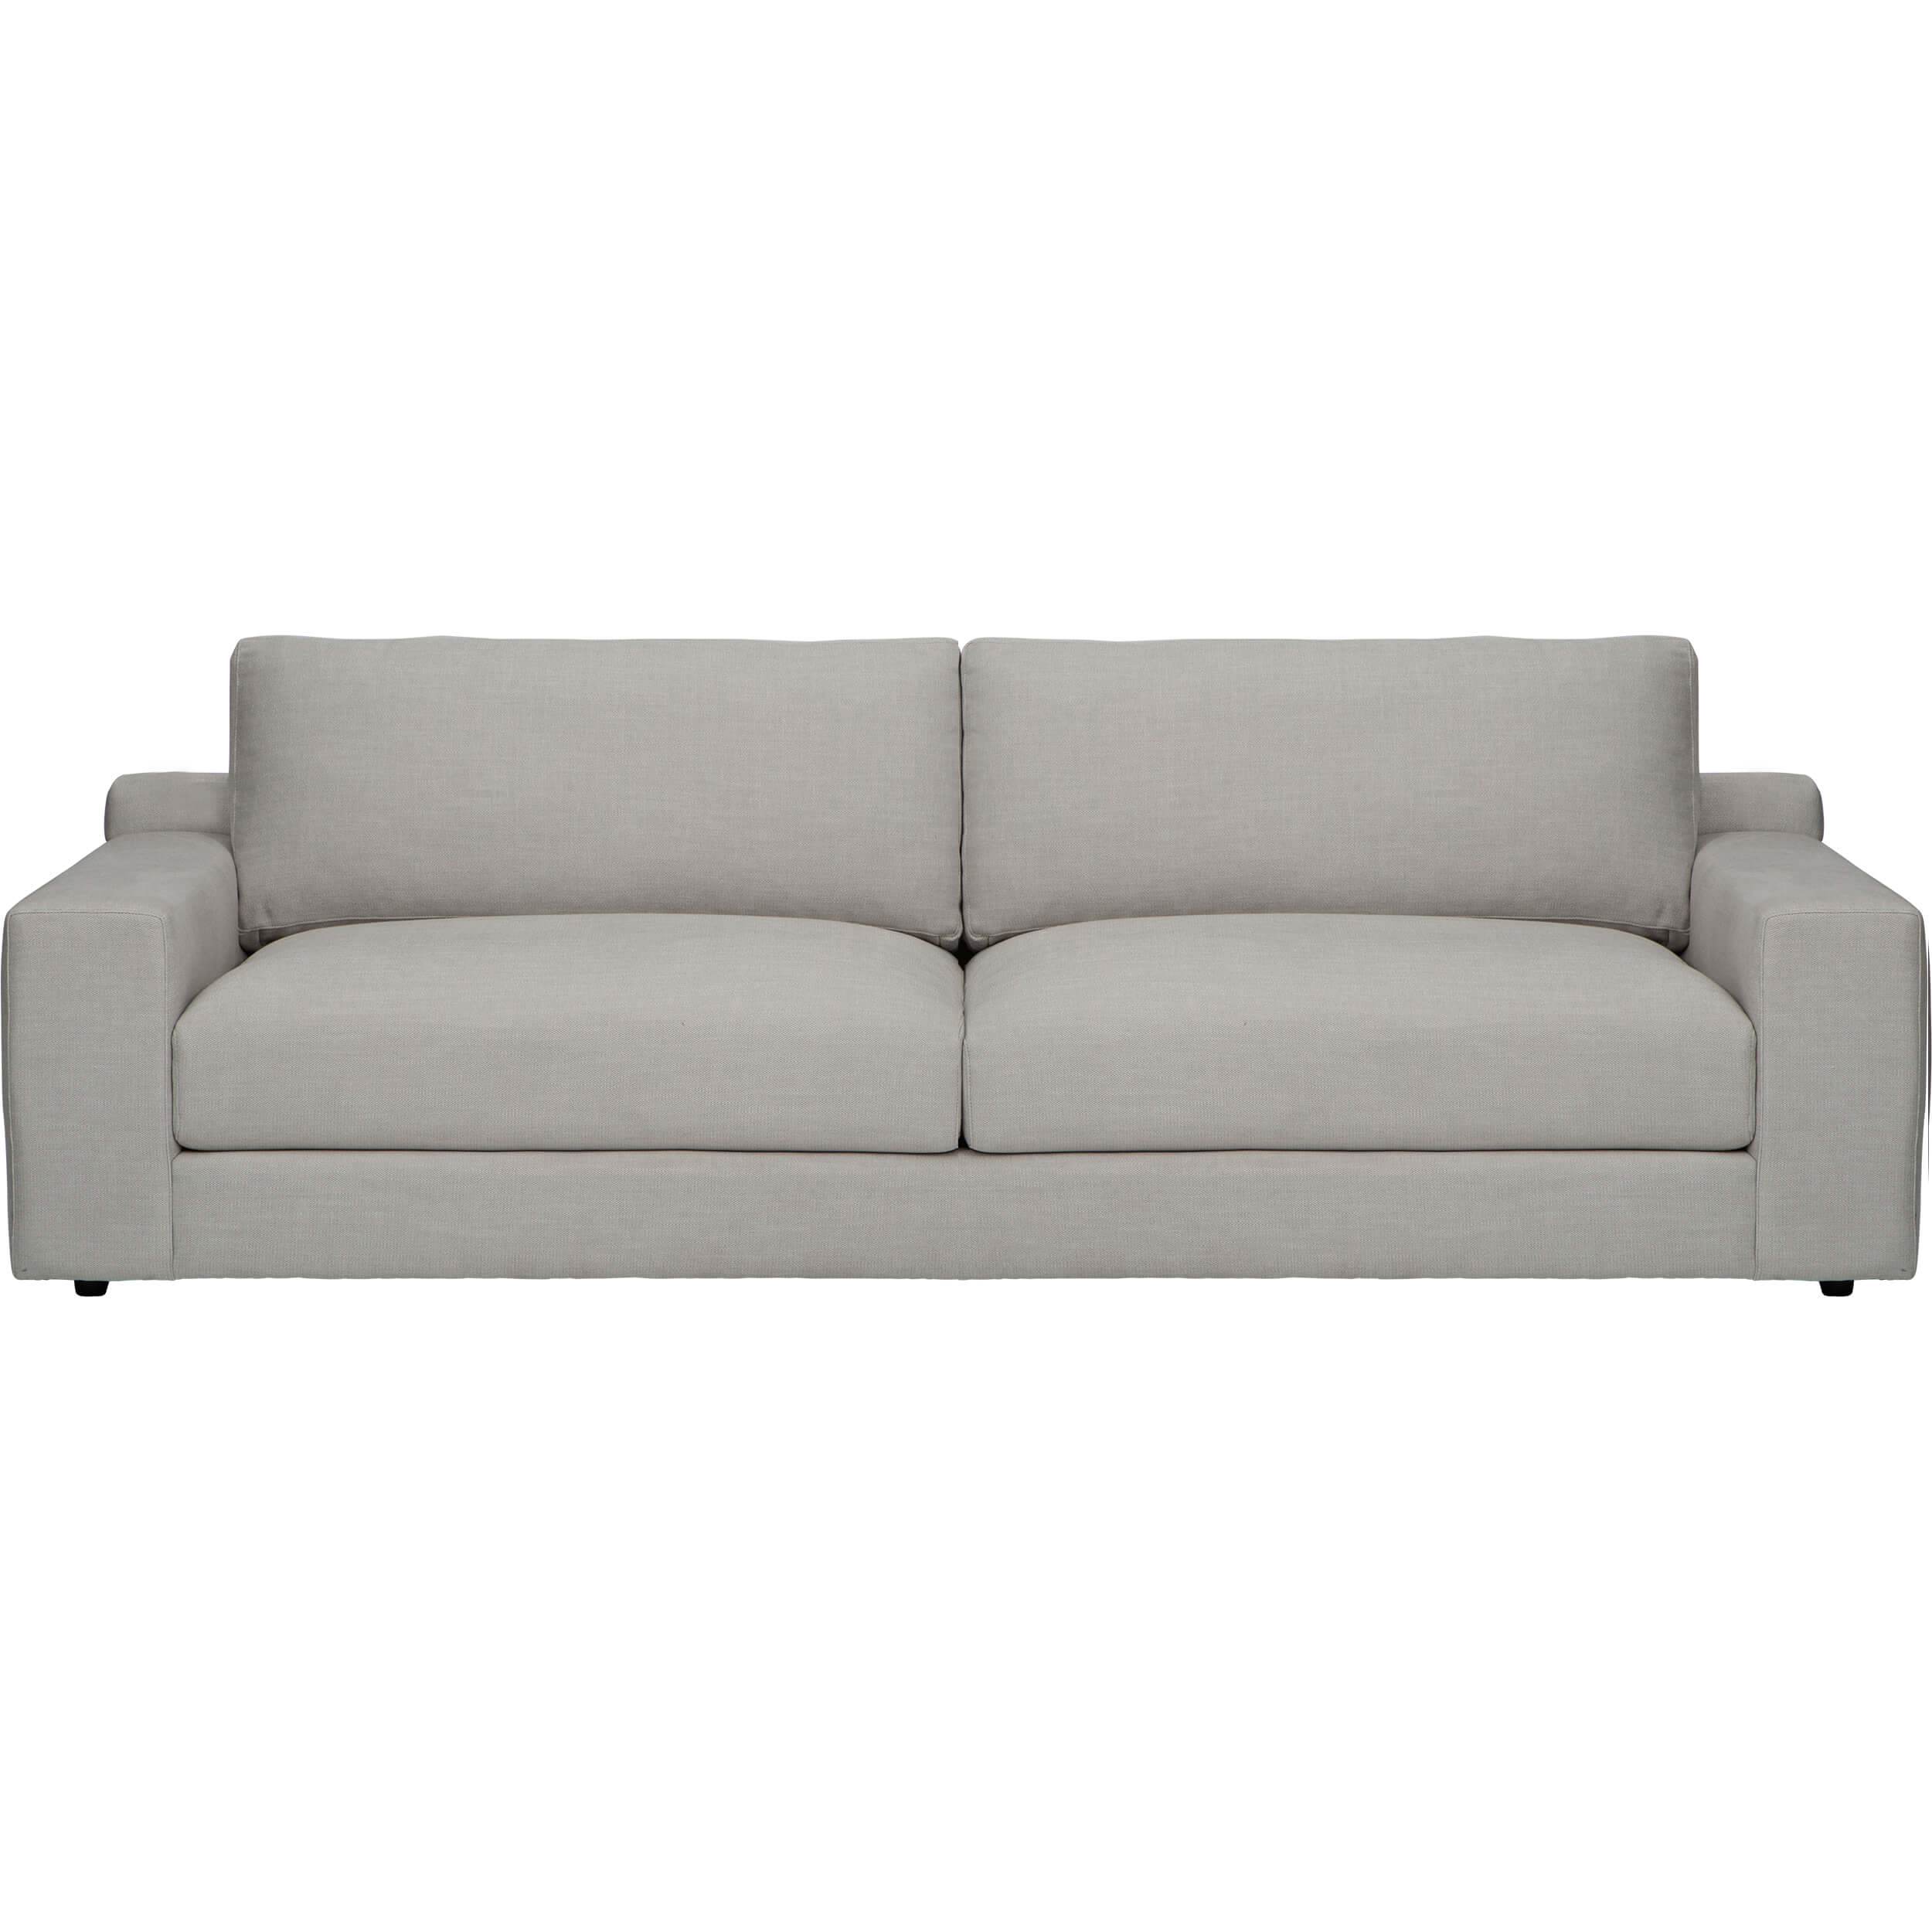 Image of Axel Sofa, Daly Silver